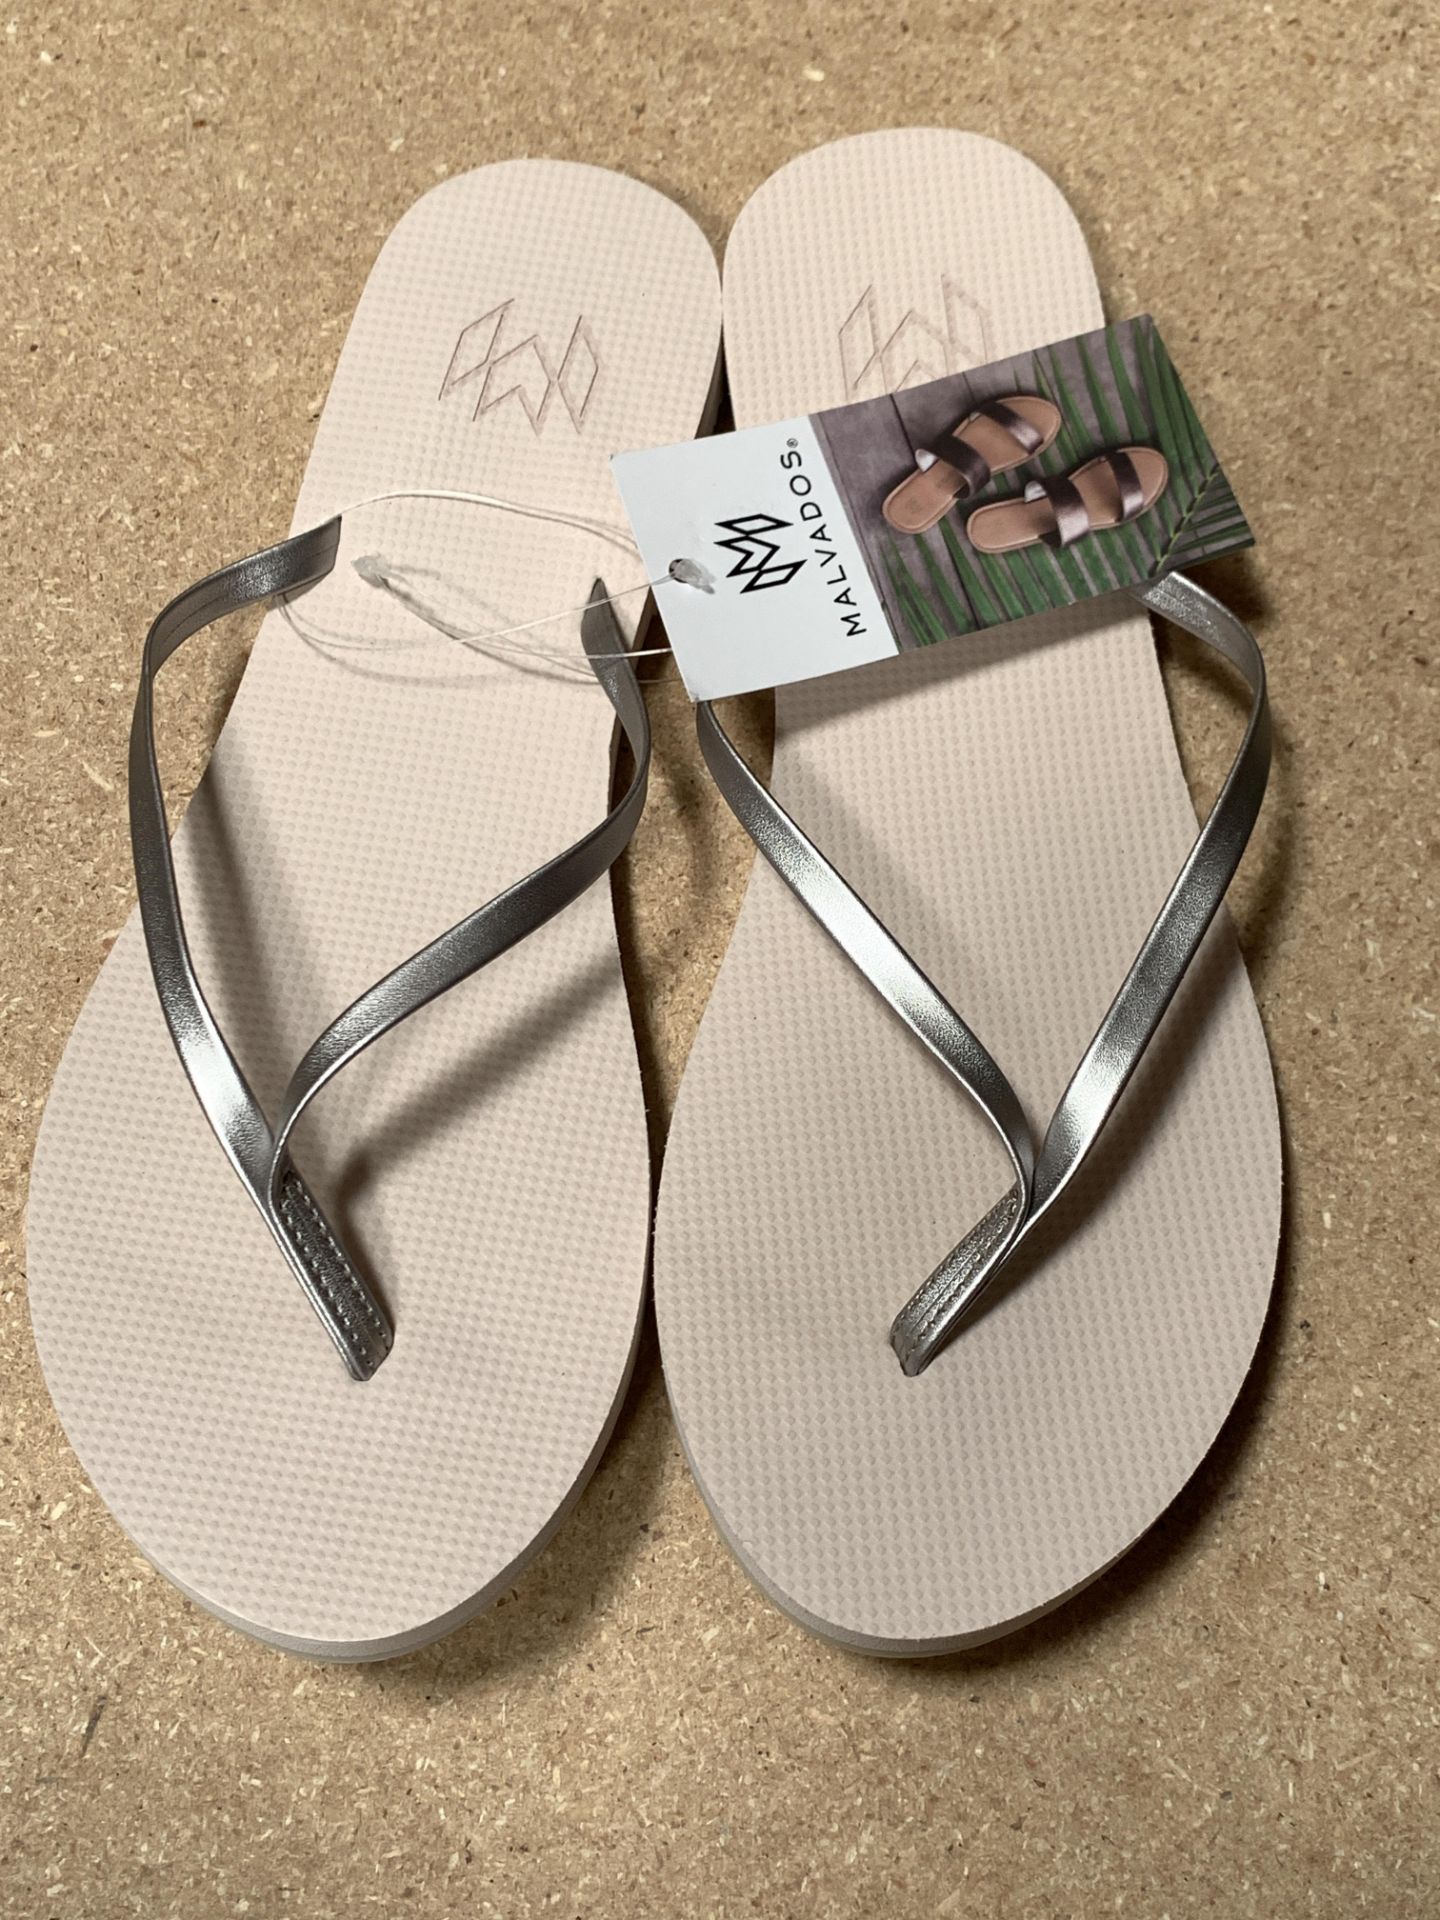 7 Pairs Malvados Flip Flop Sandals, New with Tags, Various Sizes, Lux Wicked (Retail Value $266) - Image 3 of 5